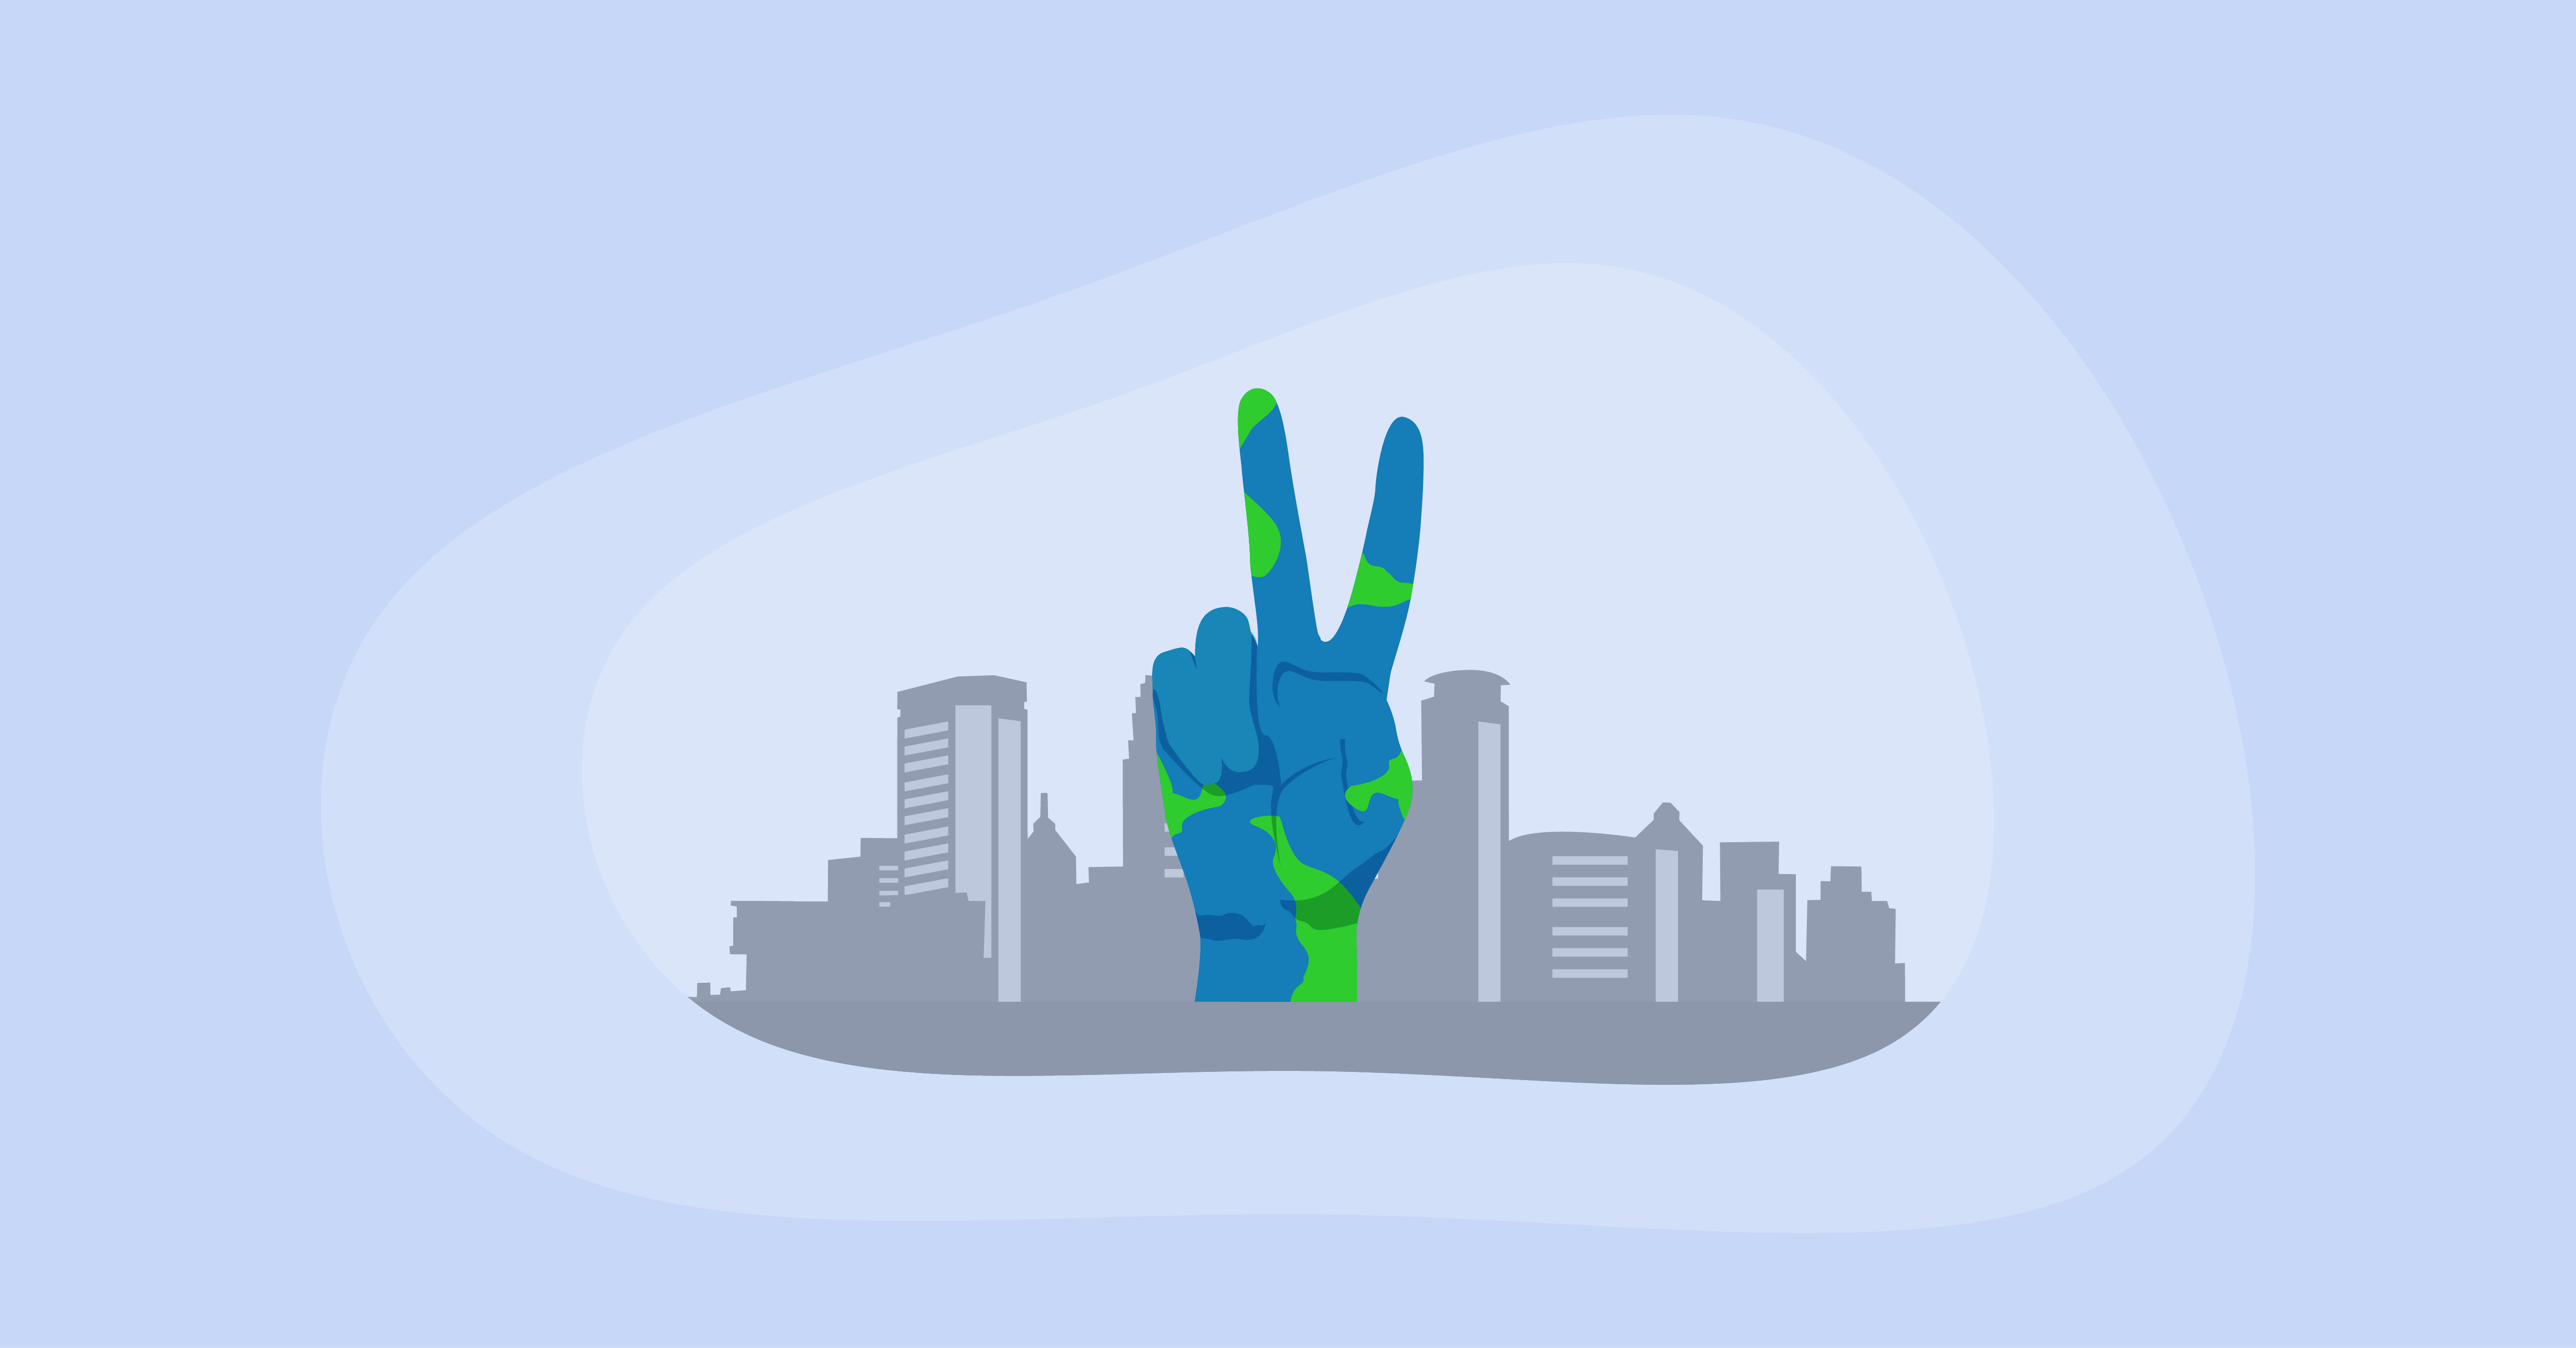 Illustration of a peace sign